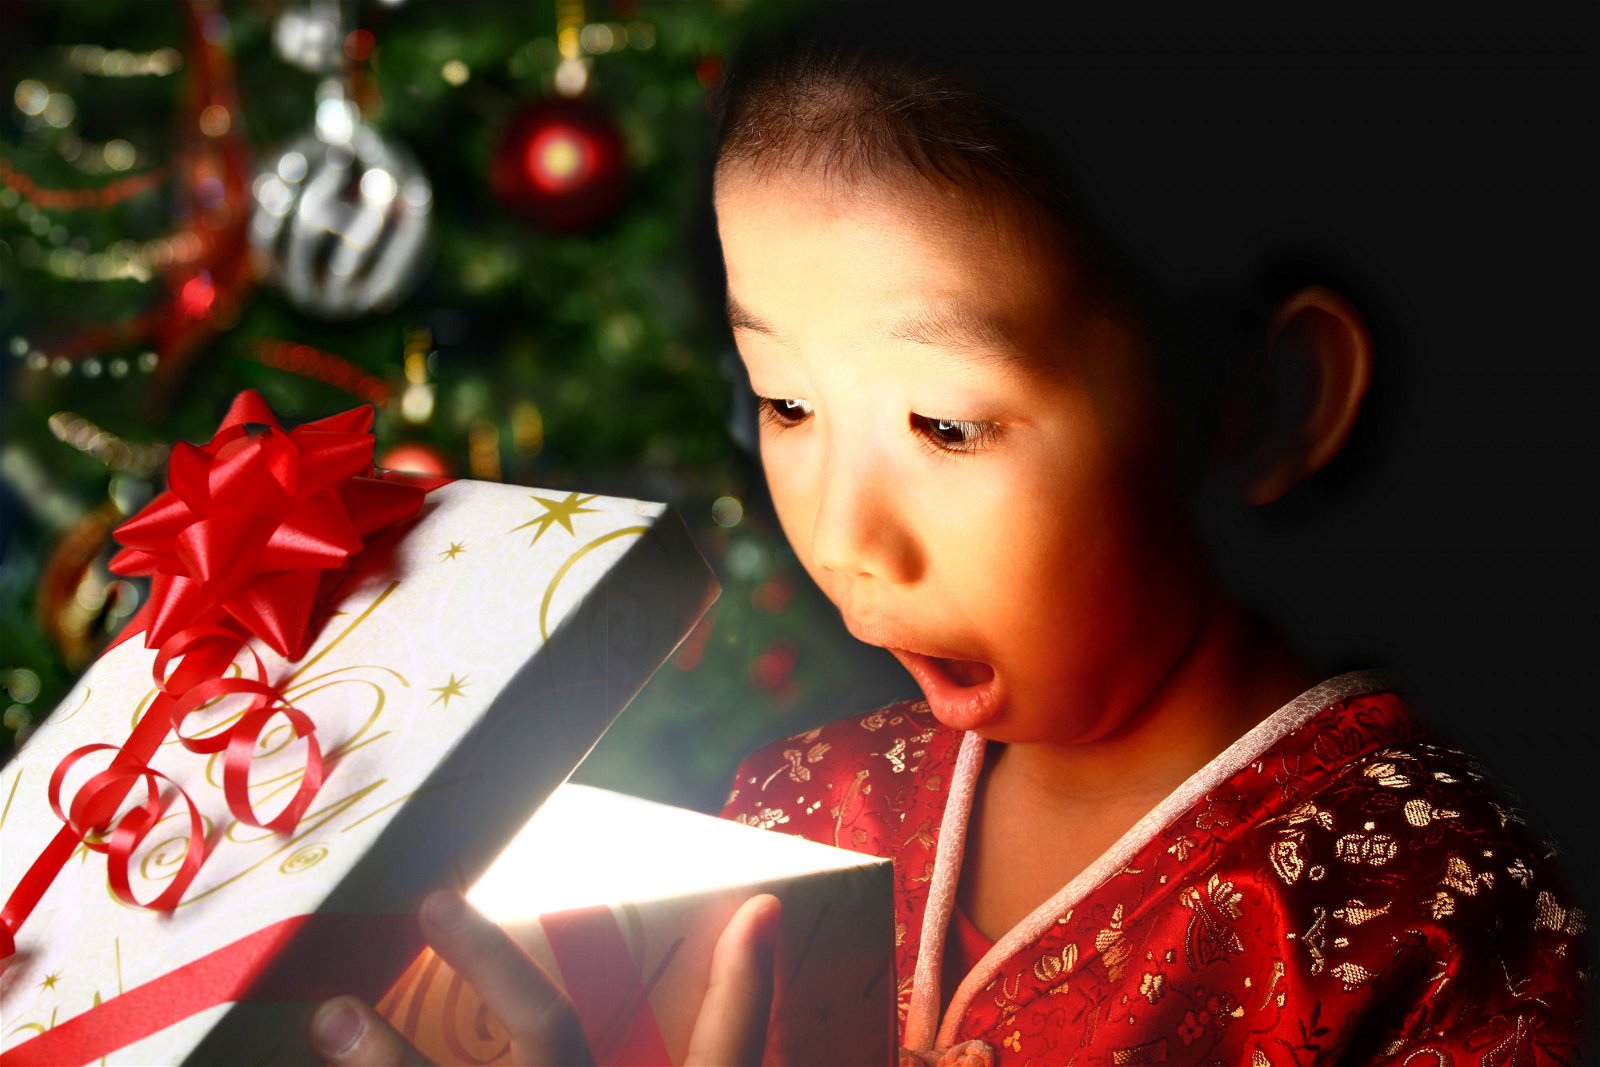 Child stares in wonder into a partially opened Christmas package. A soft glow comes from inside the box.